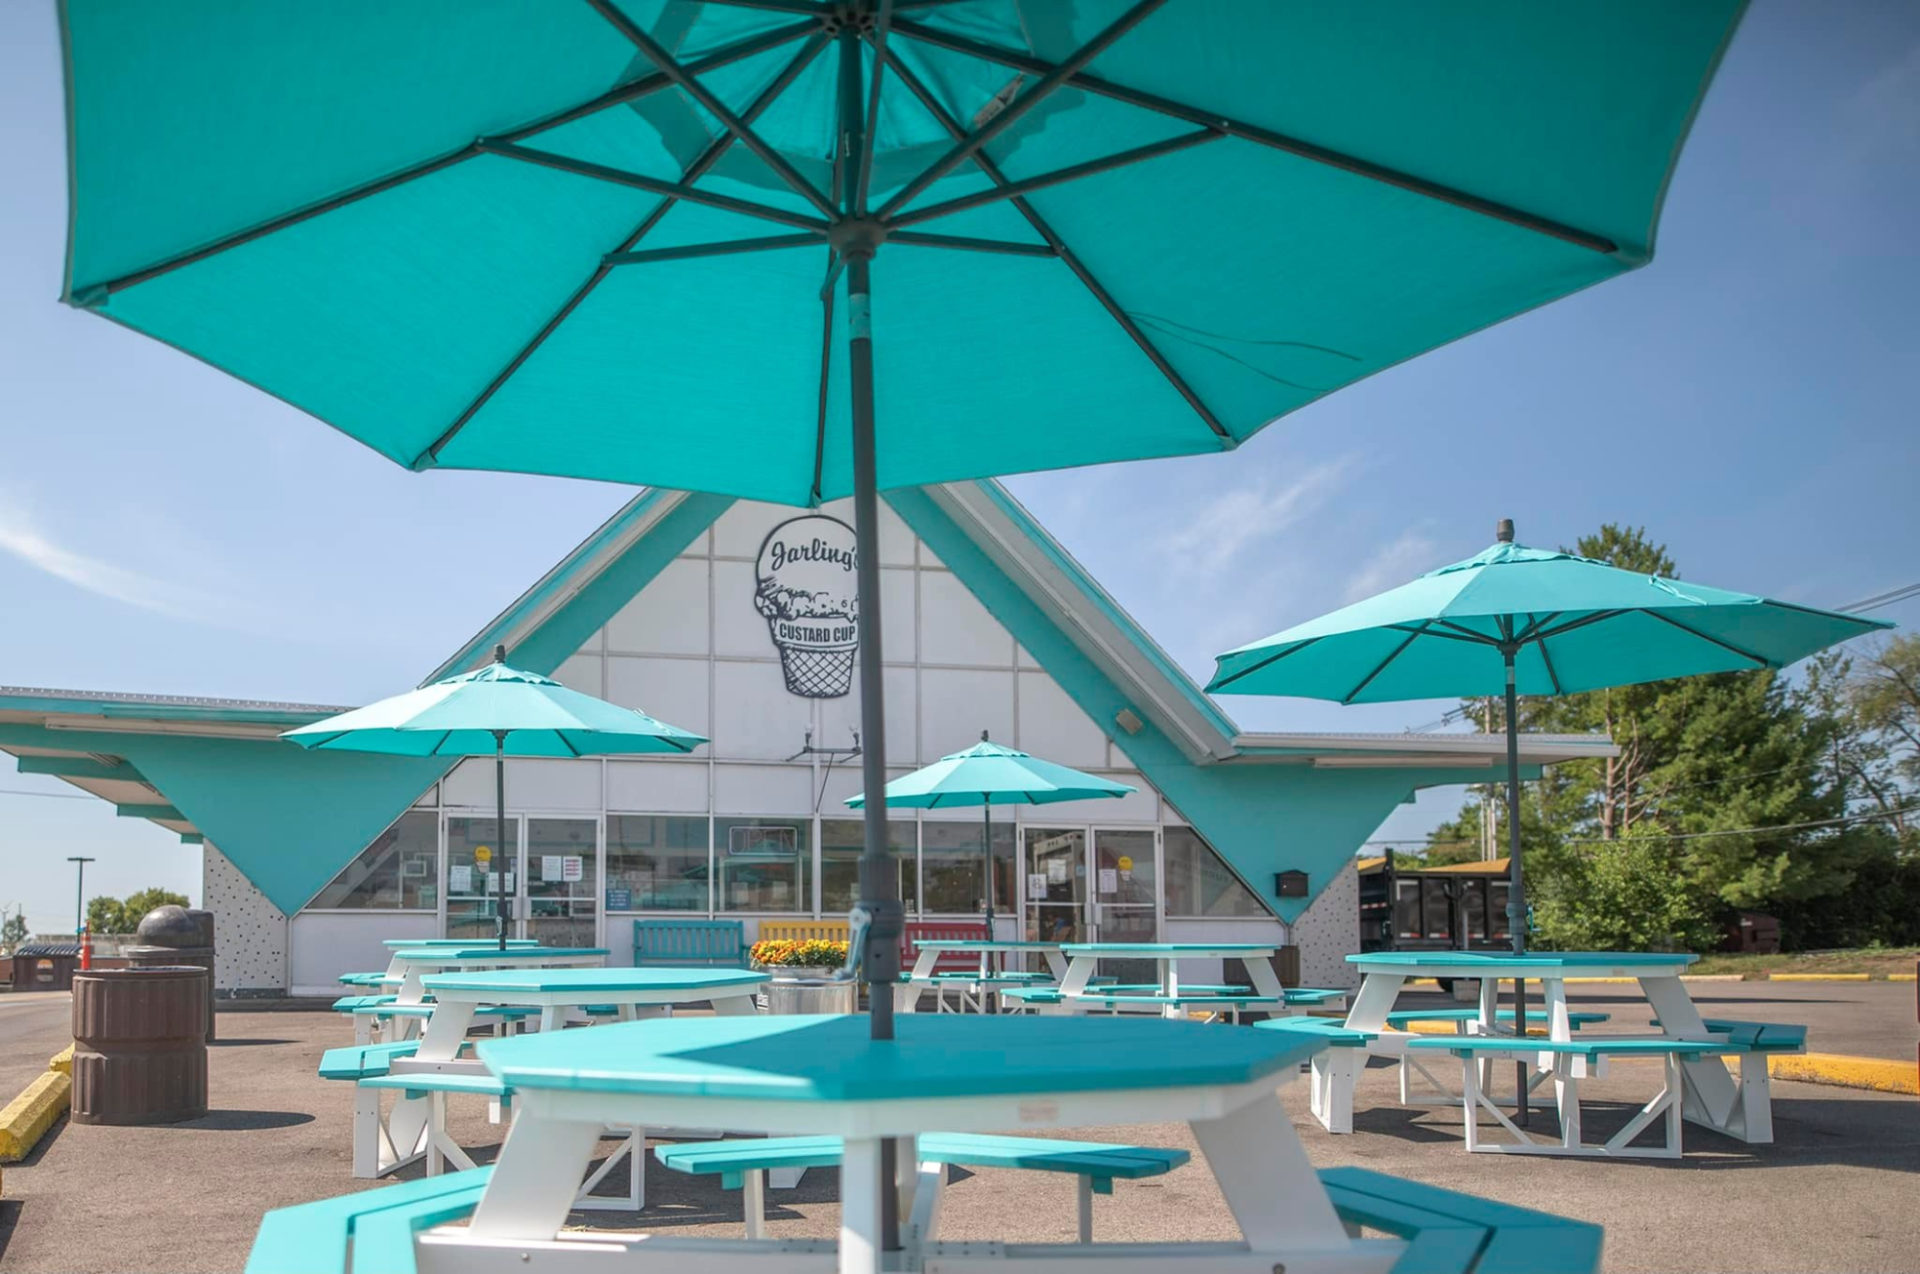 New seating at Jarling's Custard Cup. Light teal round picnic tables with matching umbrellas are seen in front of the building.